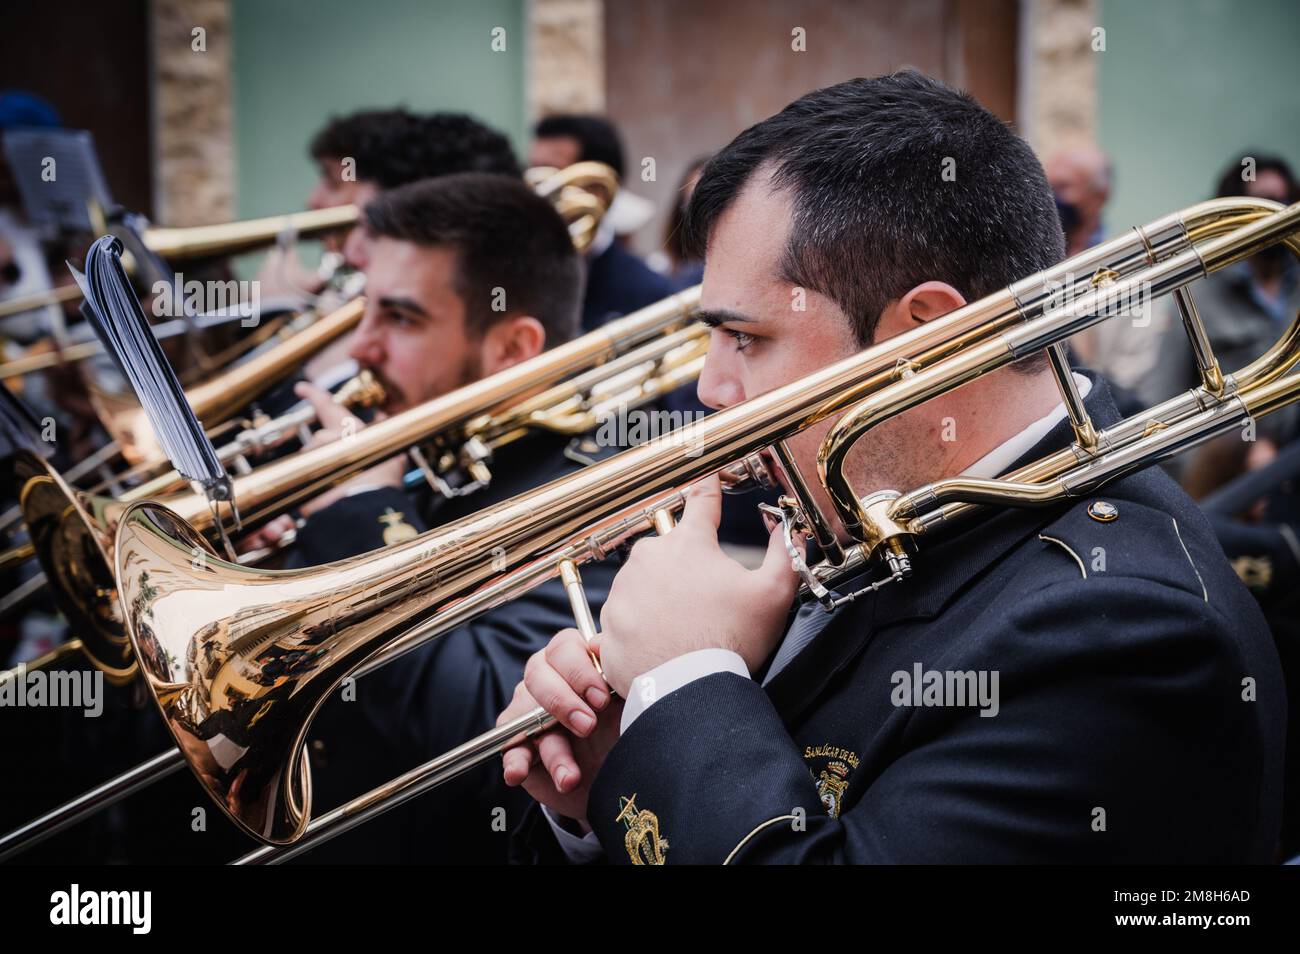 Musicians in an easter parade in a brass marching band at Semana santa or Holy week in Cadiz Spain. Stock Photo